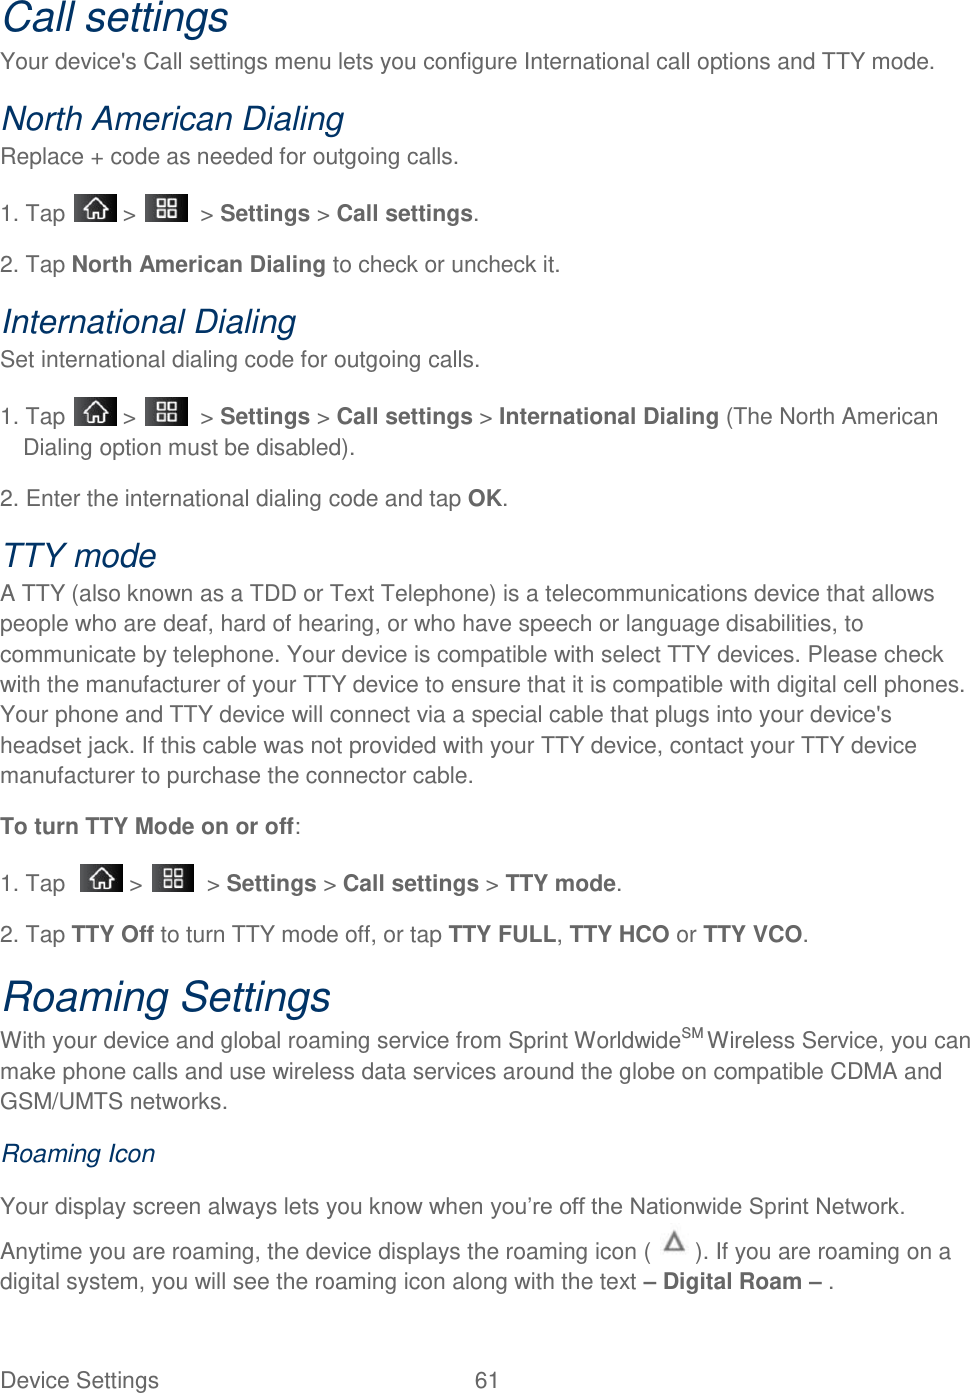 Device Settings  61 Call settings Your device&apos;s Call settings menu lets you configure International call options and TTY mode. North American Dialing  Replace + code as needed for outgoing calls. 1. Tap   &gt;    &gt; Settings &gt; Call settings. 2. Tap North American Dialing to check or uncheck it. International Dialing  Set international dialing code for outgoing calls. 1. Tap   &gt;    &gt; Settings &gt; Call settings &gt; International Dialing (The North American Dialing option must be disabled). 2. Enter the international dialing code and tap OK. TTY mode  A TTY (also known as a TDD or Text Telephone) is a telecommunications device that allows people who are deaf, hard of hearing, or who have speech or language disabilities, to communicate by telephone. Your device is compatible with select TTY devices. Please check with the manufacturer of your TTY device to ensure that it is compatible with digital cell phones. Your phone and TTY device will connect via a special cable that plugs into your device&apos;s headset jack. If this cable was not provided with your TTY device, contact your TTY device manufacturer to purchase the connector cable.  To turn TTY Mode on or off:  1. Tap    &gt;    &gt; Settings &gt; Call settings &gt; TTY mode.  2. Tap TTY Off to turn TTY mode off, or tap TTY FULL, TTY HCO or TTY VCO. Roaming Settings With your device and global roaming service from Sprint WorldwideSM Wireless Service, you can make phone calls and use wireless data services around the globe on compatible CDMA and GSM/UMTS networks. Roaming Icon Your display screen always lets you know when you‘re off the Nationwide Sprint Network. Anytime you are roaming, the device displays the roaming icon (   ). If you are roaming on a digital system, you will see the roaming icon along with the text – Digital Roam – . 